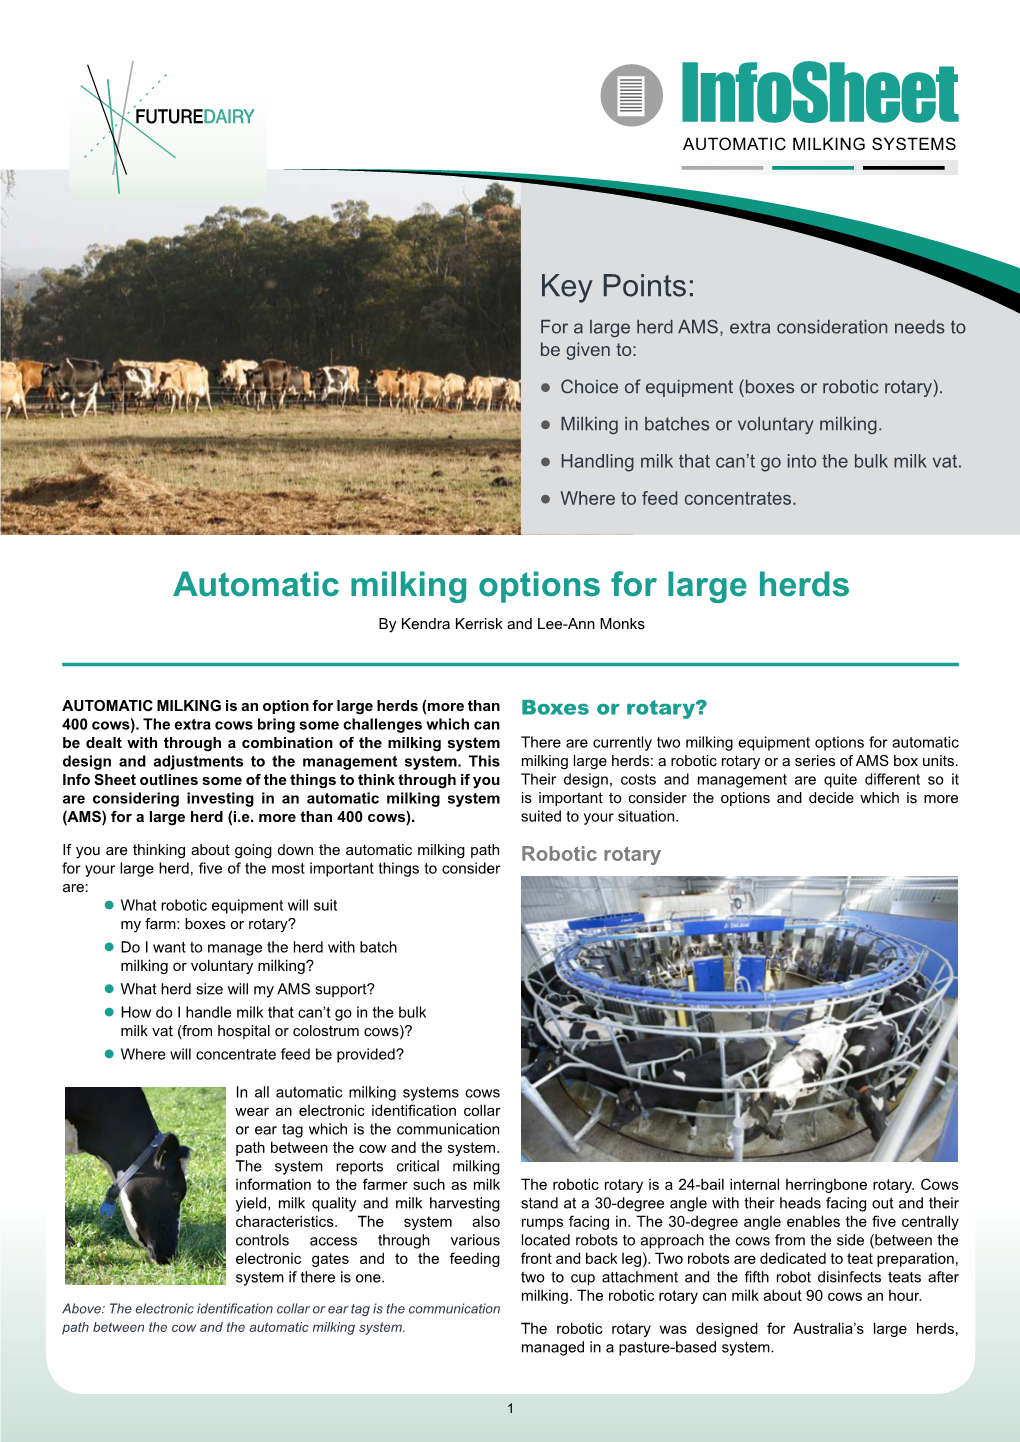 Automatic Milking Options for Large Herds by Kendra Kerrisk and Lee-Ann Monks